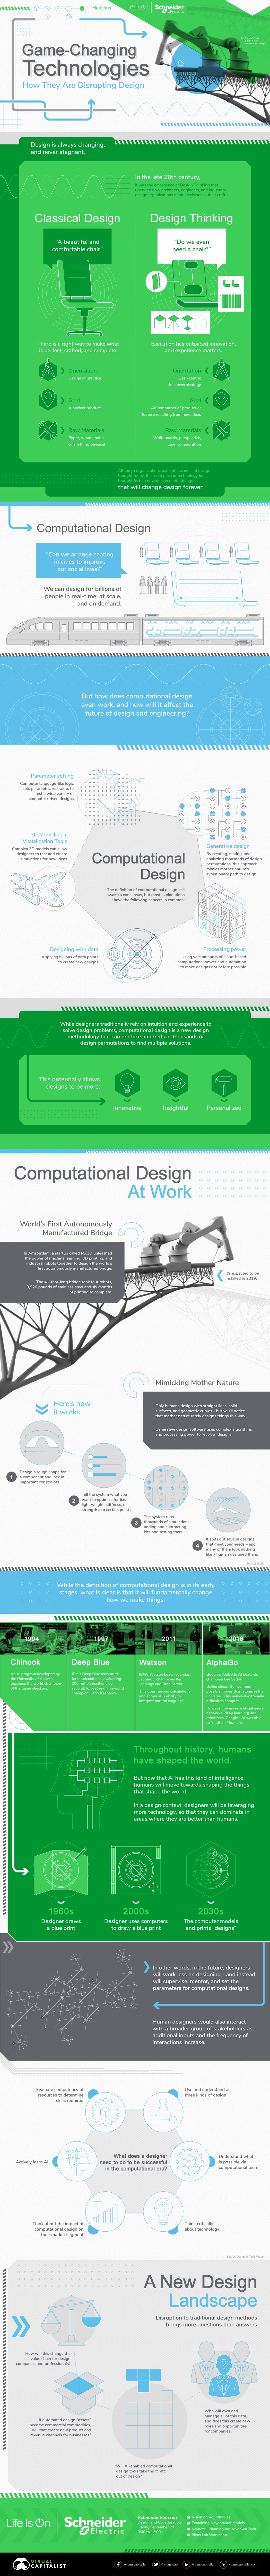 Game-Changing Technologies: How They Are Disrupting Design #Infographic